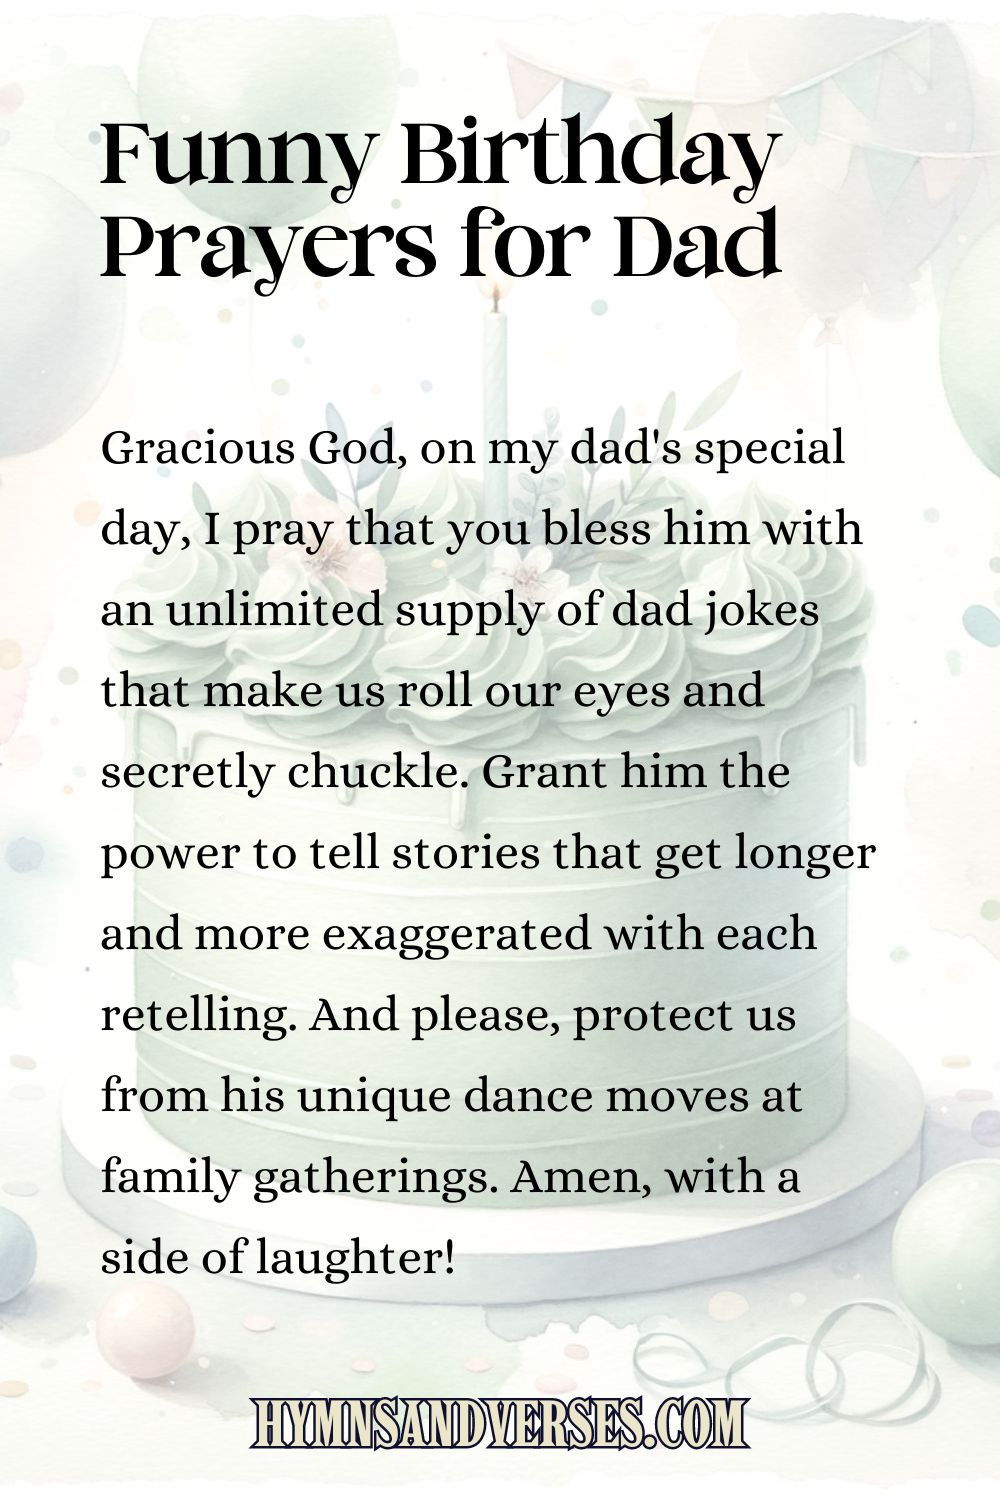 Birthday prayers for daddy pin image, reads: Gracious God, on my dad's special day, I pray that you bless him with an unlimited supply of dad jokes that make us roll our eyes and secretly chuckle. Grant him the power to tell stories that get longer and more exaggerated with each retelling. And please, protect us from his unique dance moves at family gatherings. Amen, with a side of laughter!